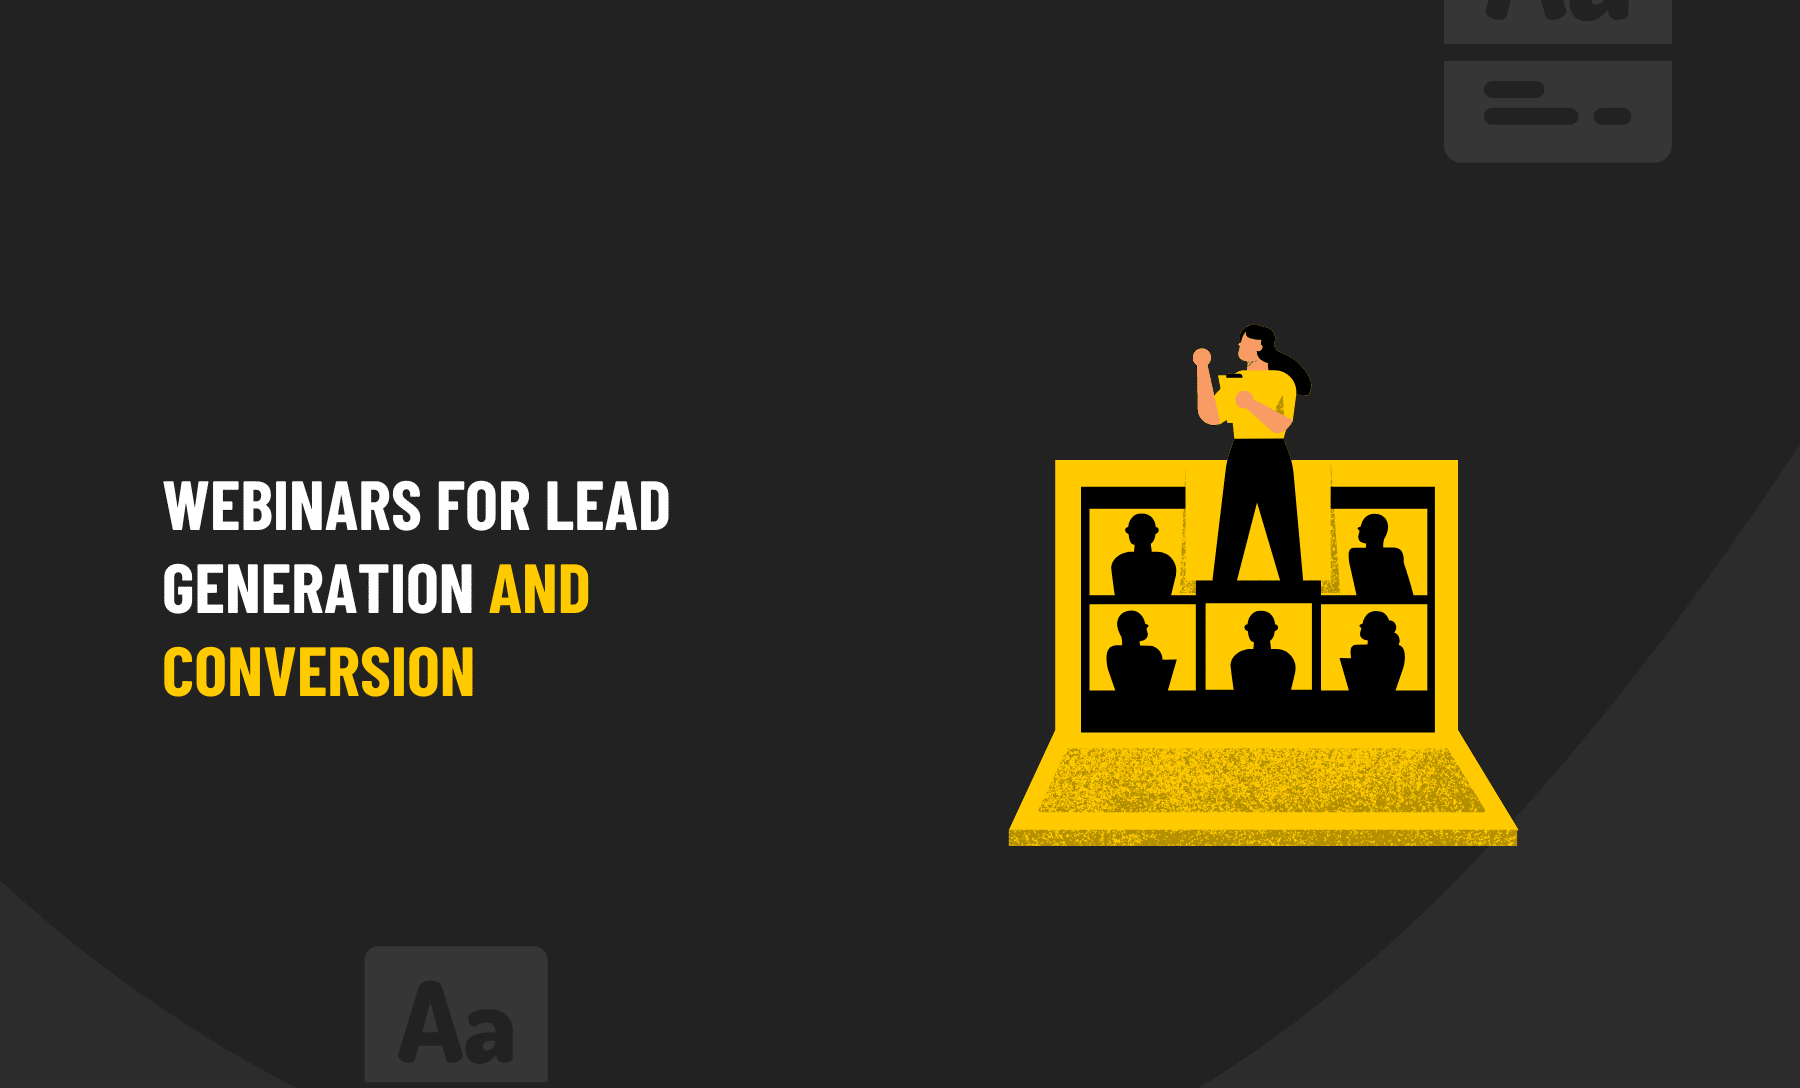 Webinars for lead generation and conversion